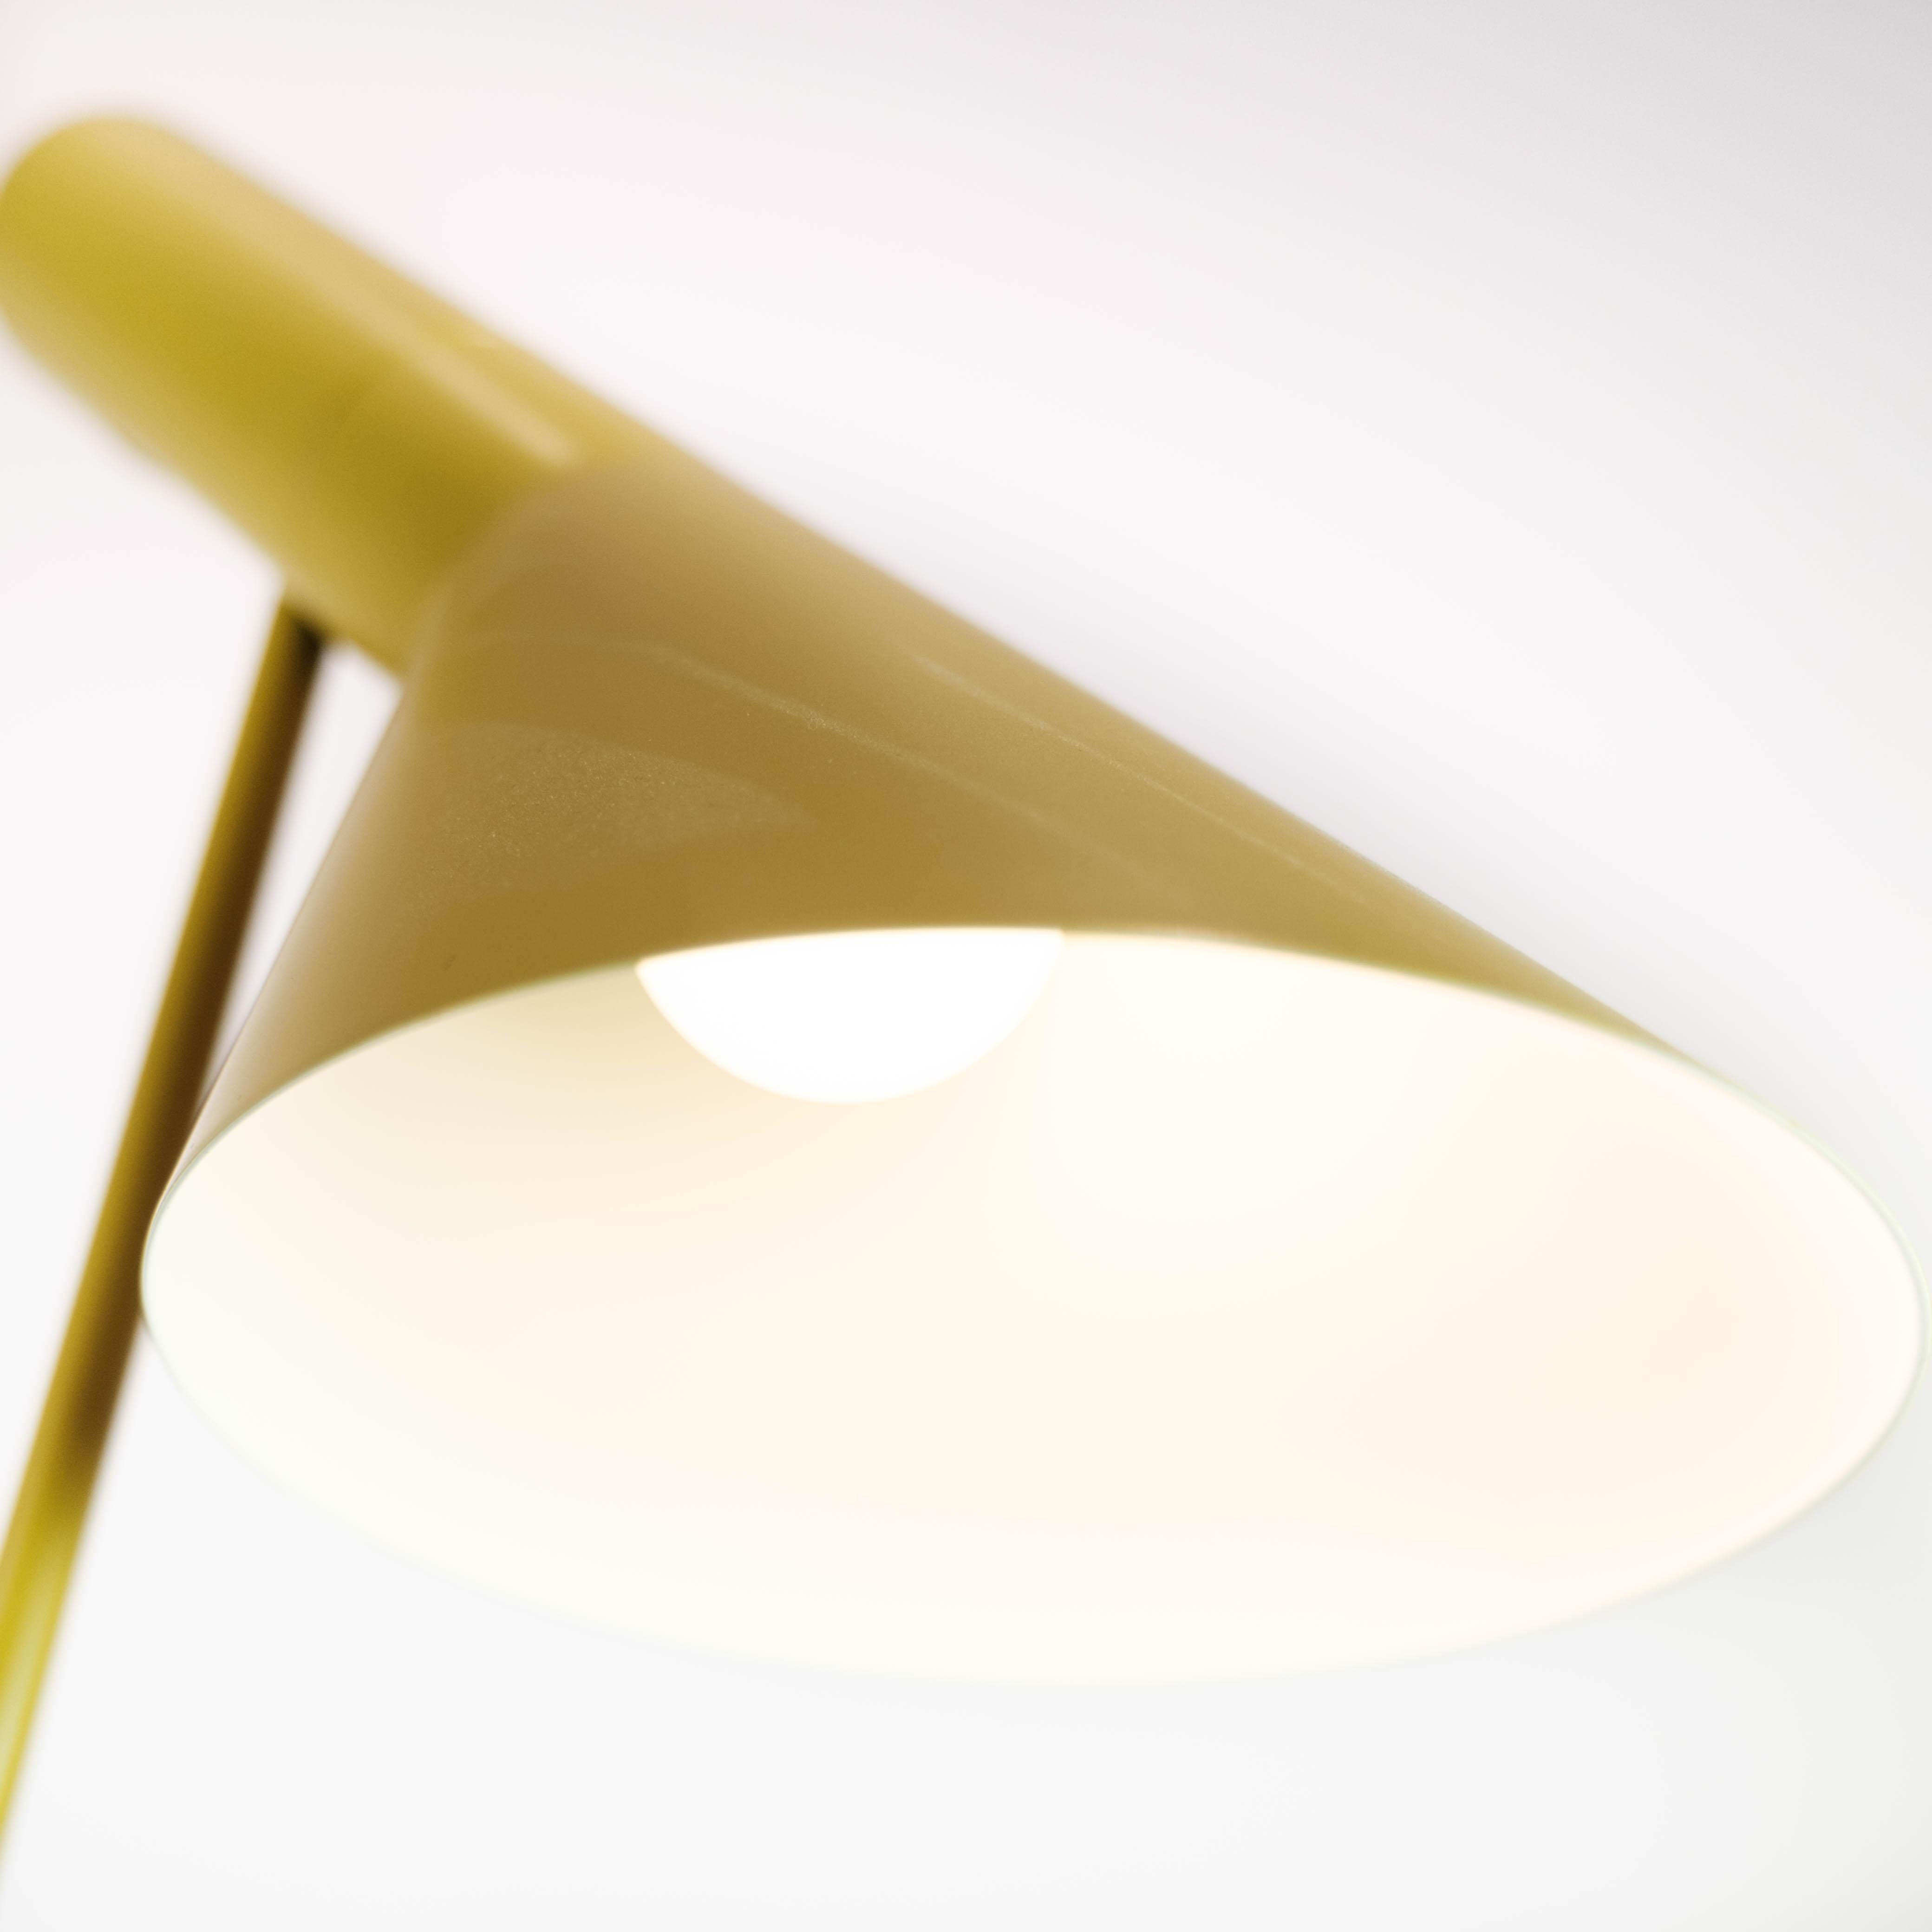 Scandinavian Modern Yellow Floor Lamp Designed by Arne Jacobsen and Manufactured by Louis Poulsen